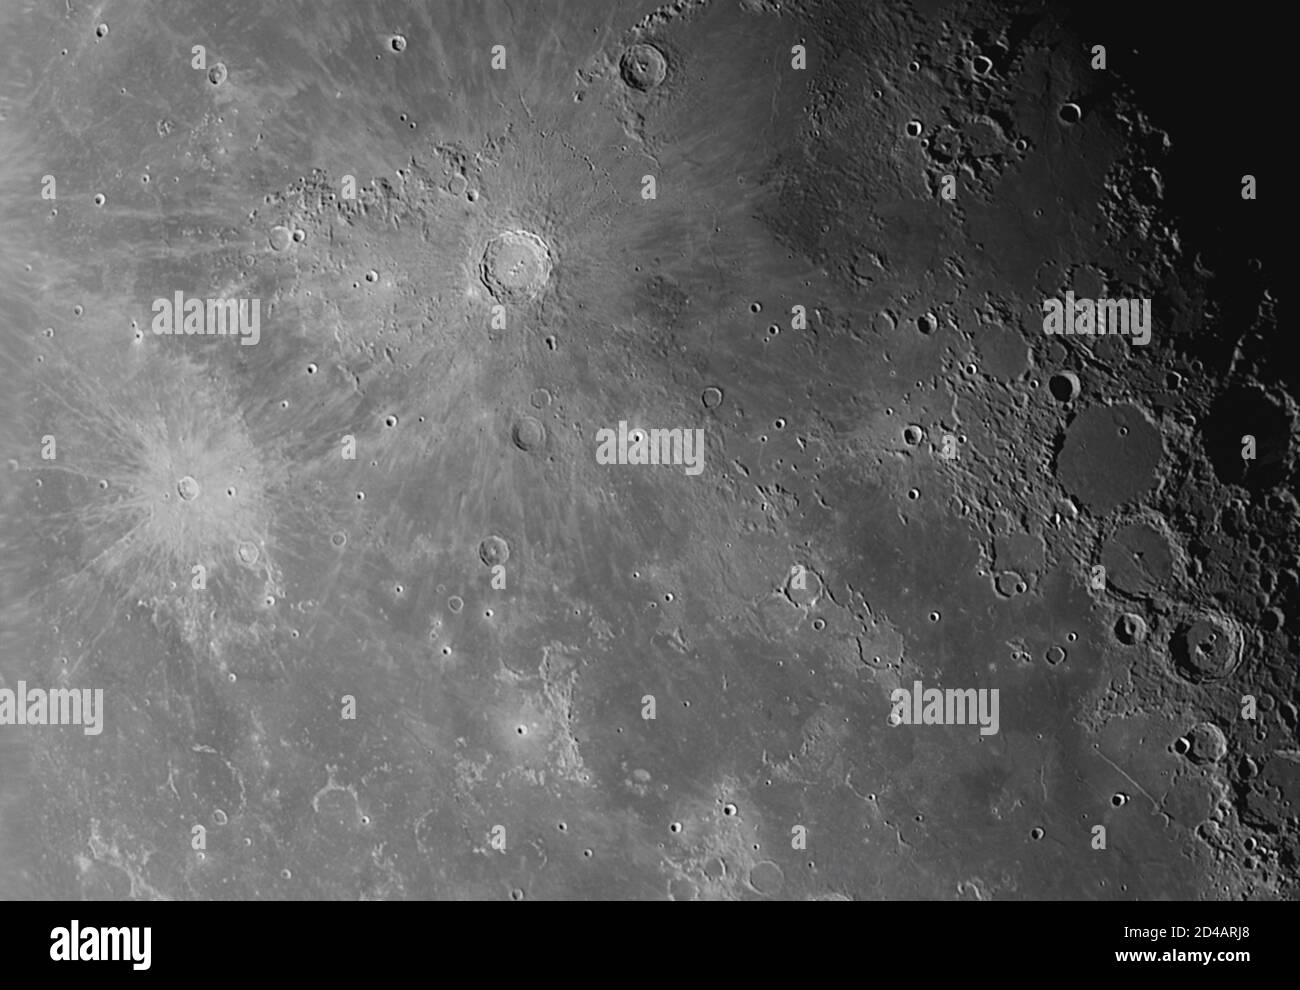 9 October 2020, London, UK. Closeup of Mare Nubium surface (centre right) with the three craters Ptolemaeus, Alphonsus and Arzachel in a diagonal line, lower right. The bright ray crater Copernicus is upper left of centre and crater Kepler with a large ray system is to the left. Stock Photo